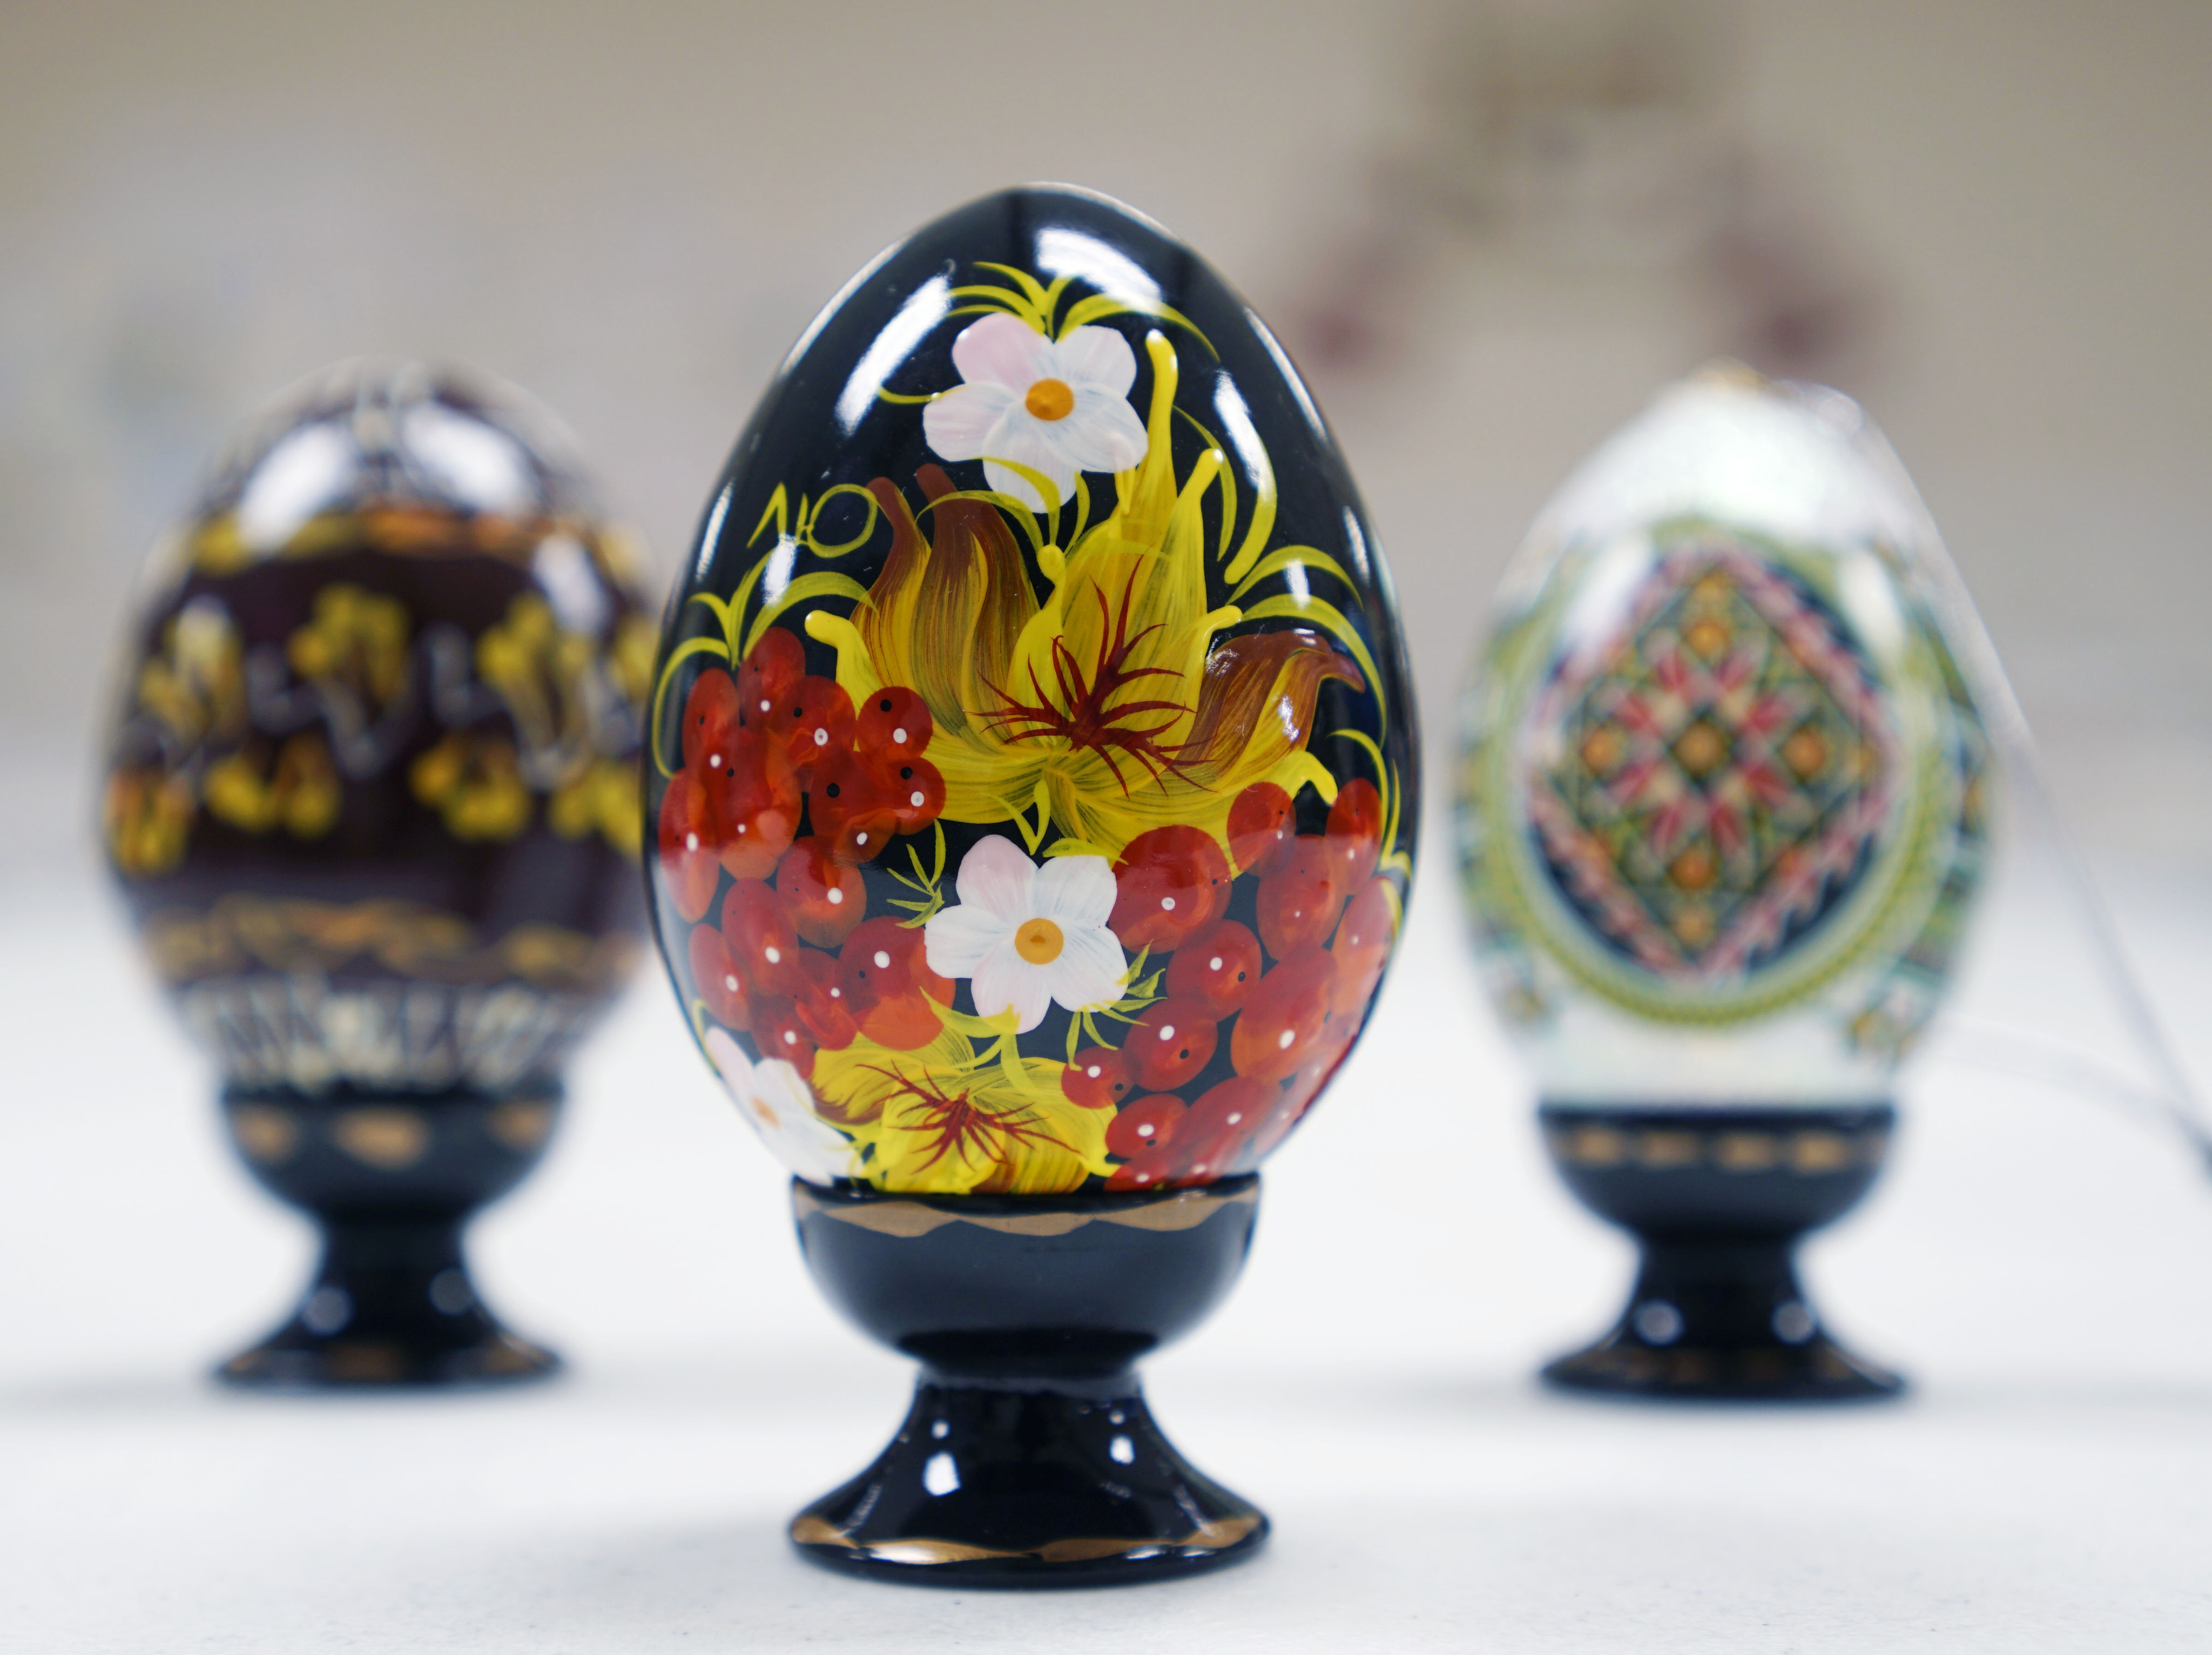 PYSANKY UKRAINIAN EGG DECORATING-SOLD OUT - Museum of Russian Icons